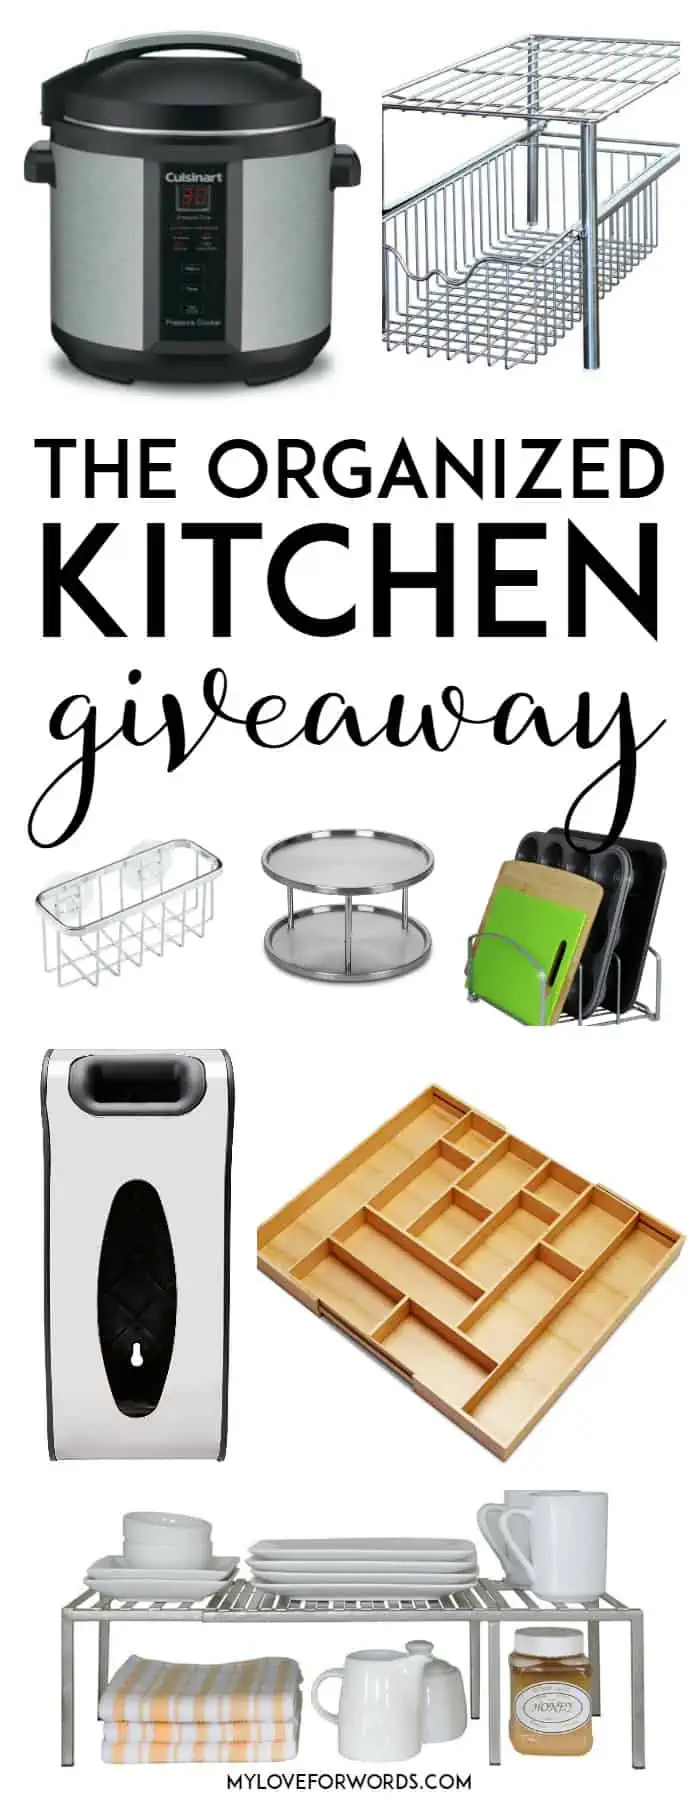 HUGE GIVEAWAY!! Get all of the organizing essentials for creating a functional and organized kitchen where every item has its place. Perfect giveaway to win before the crazy holiday baking and cooking season!